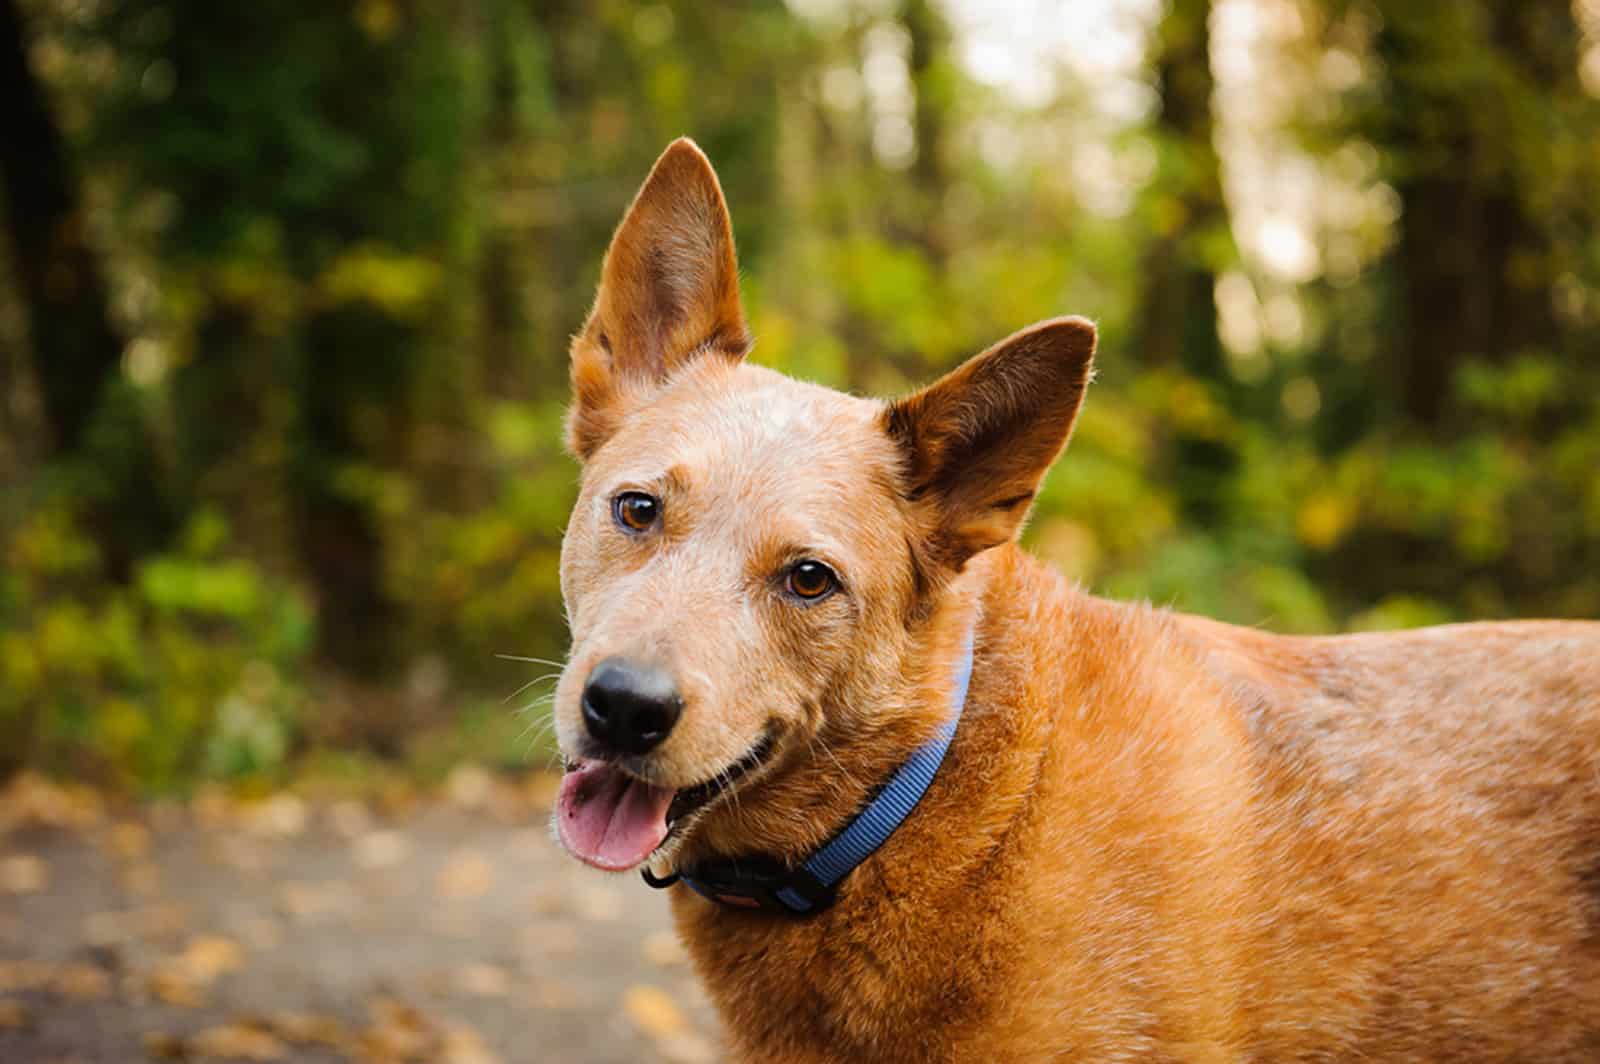 red heeler dog outdoors in the forest